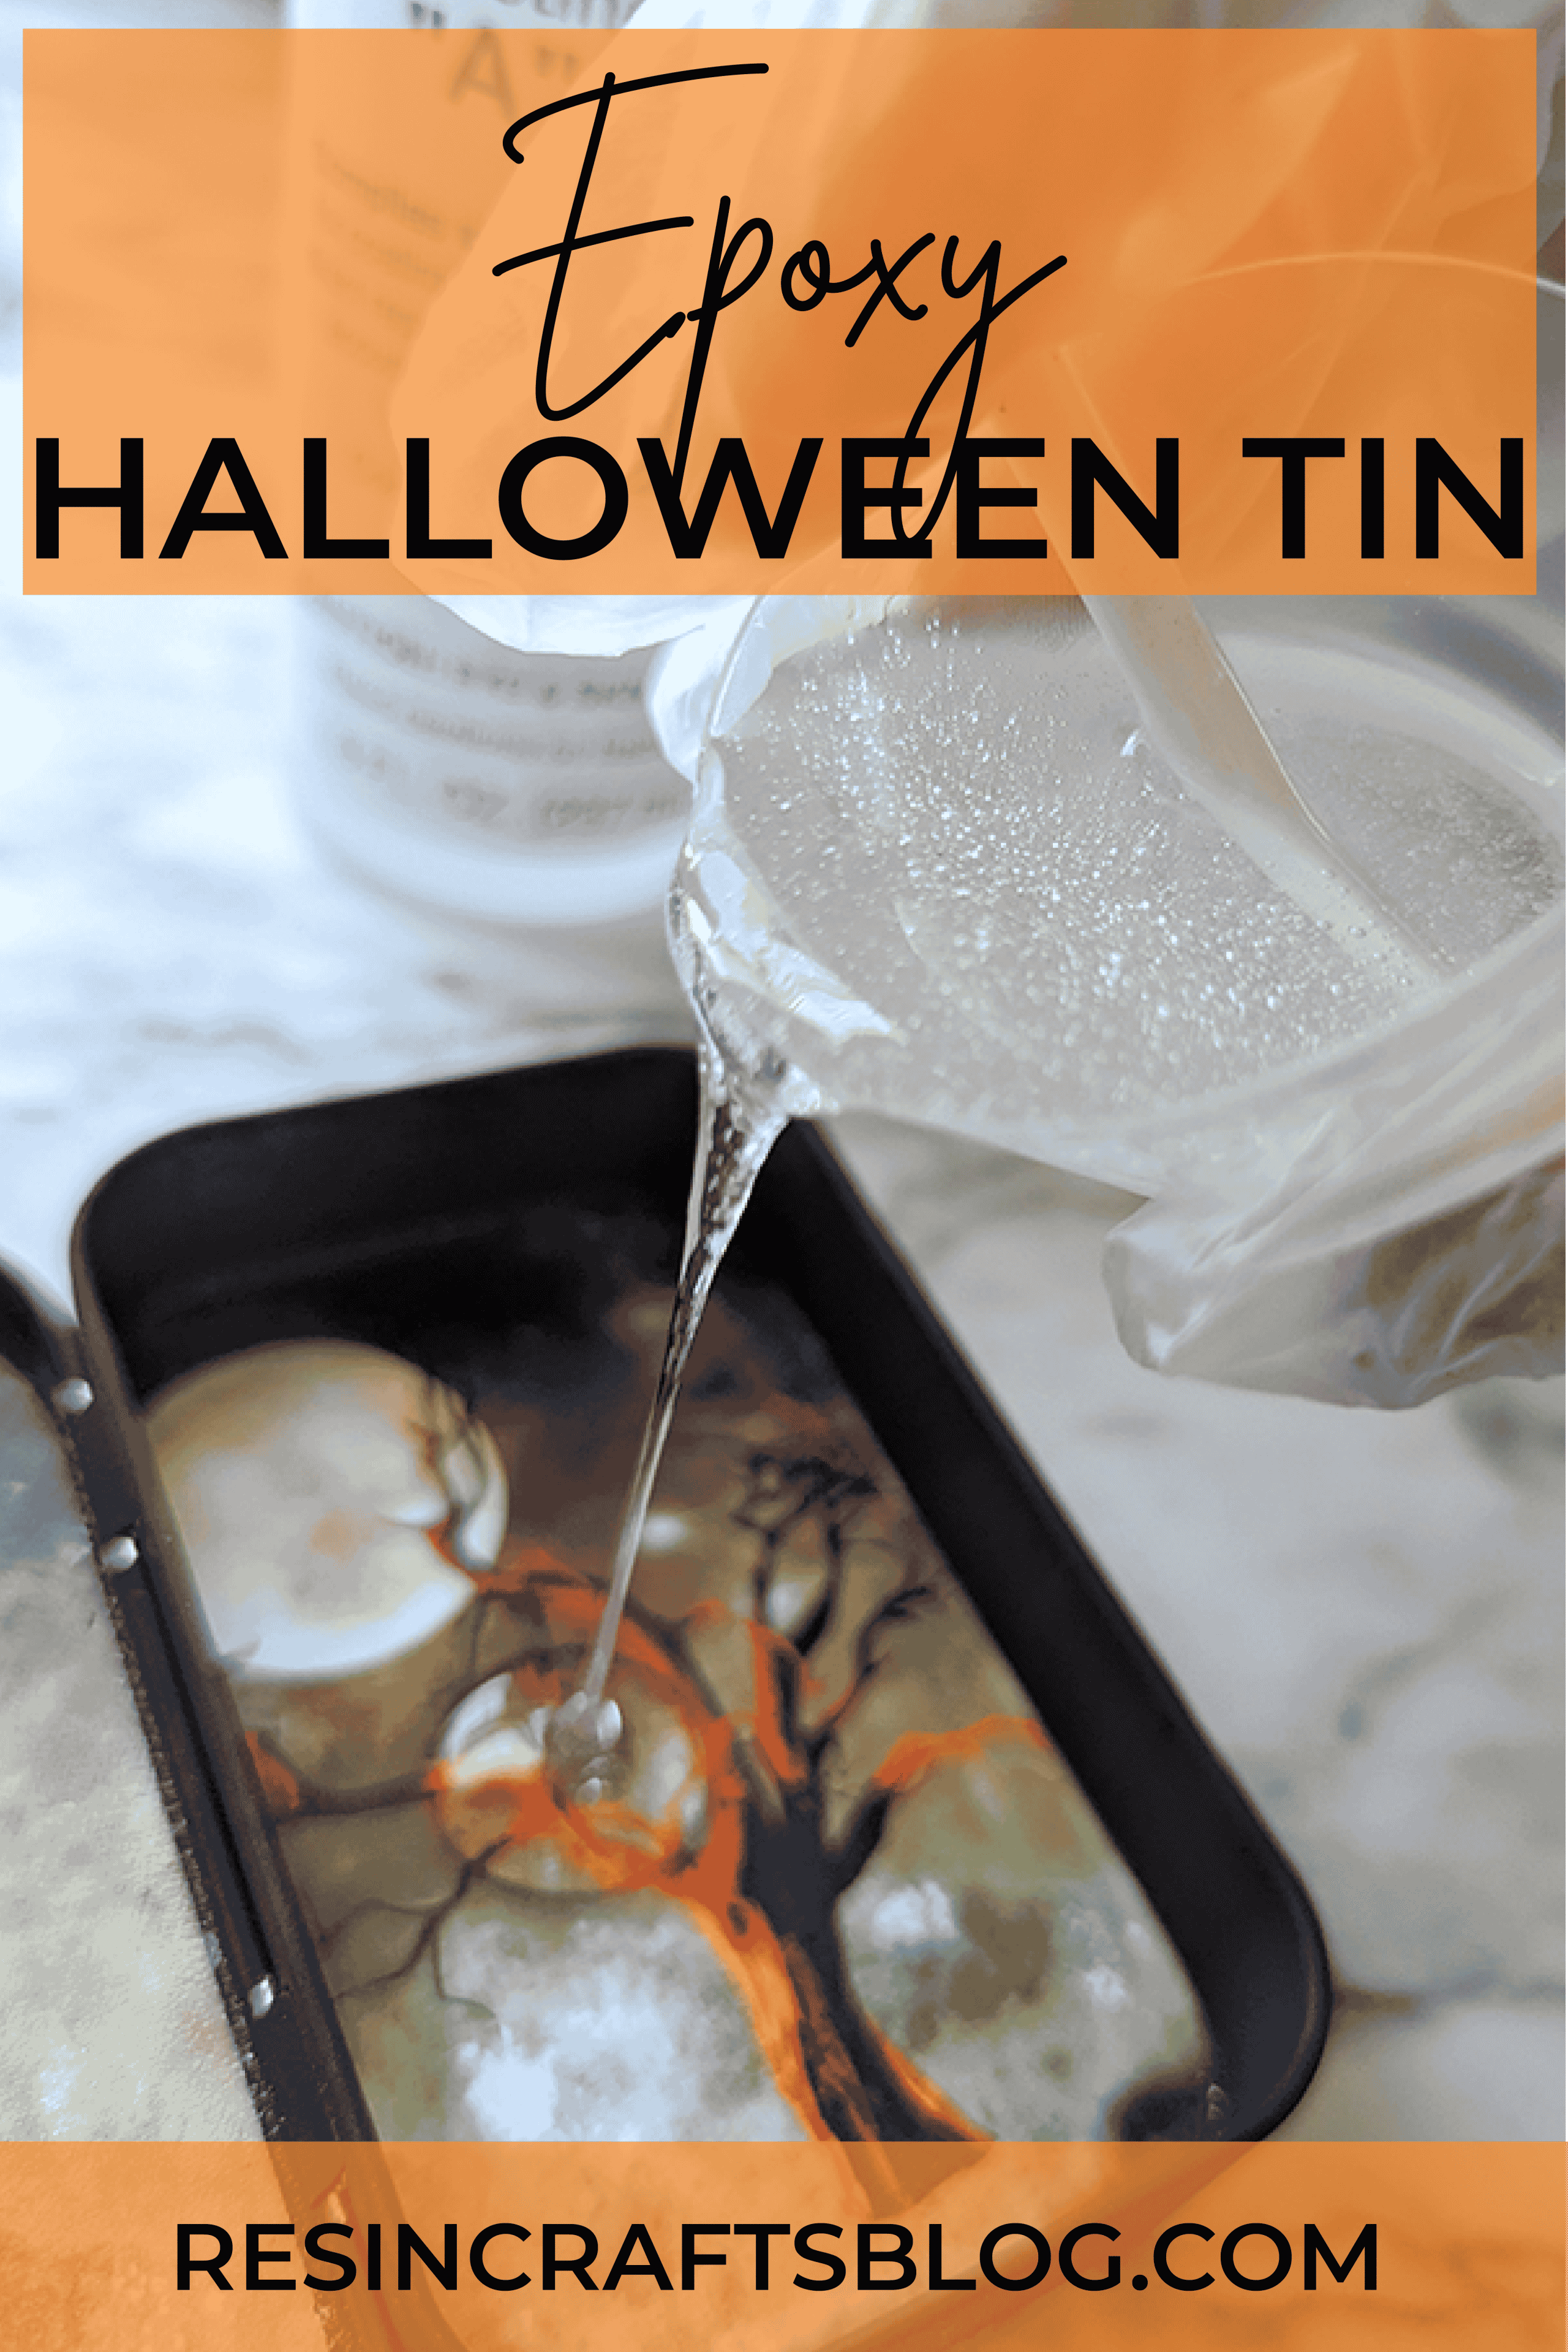 Layer epoxy resin and stickers or charms to make an epoxy Altoid Tin for Halloween - makes a cute decoration via @resincraftsblog